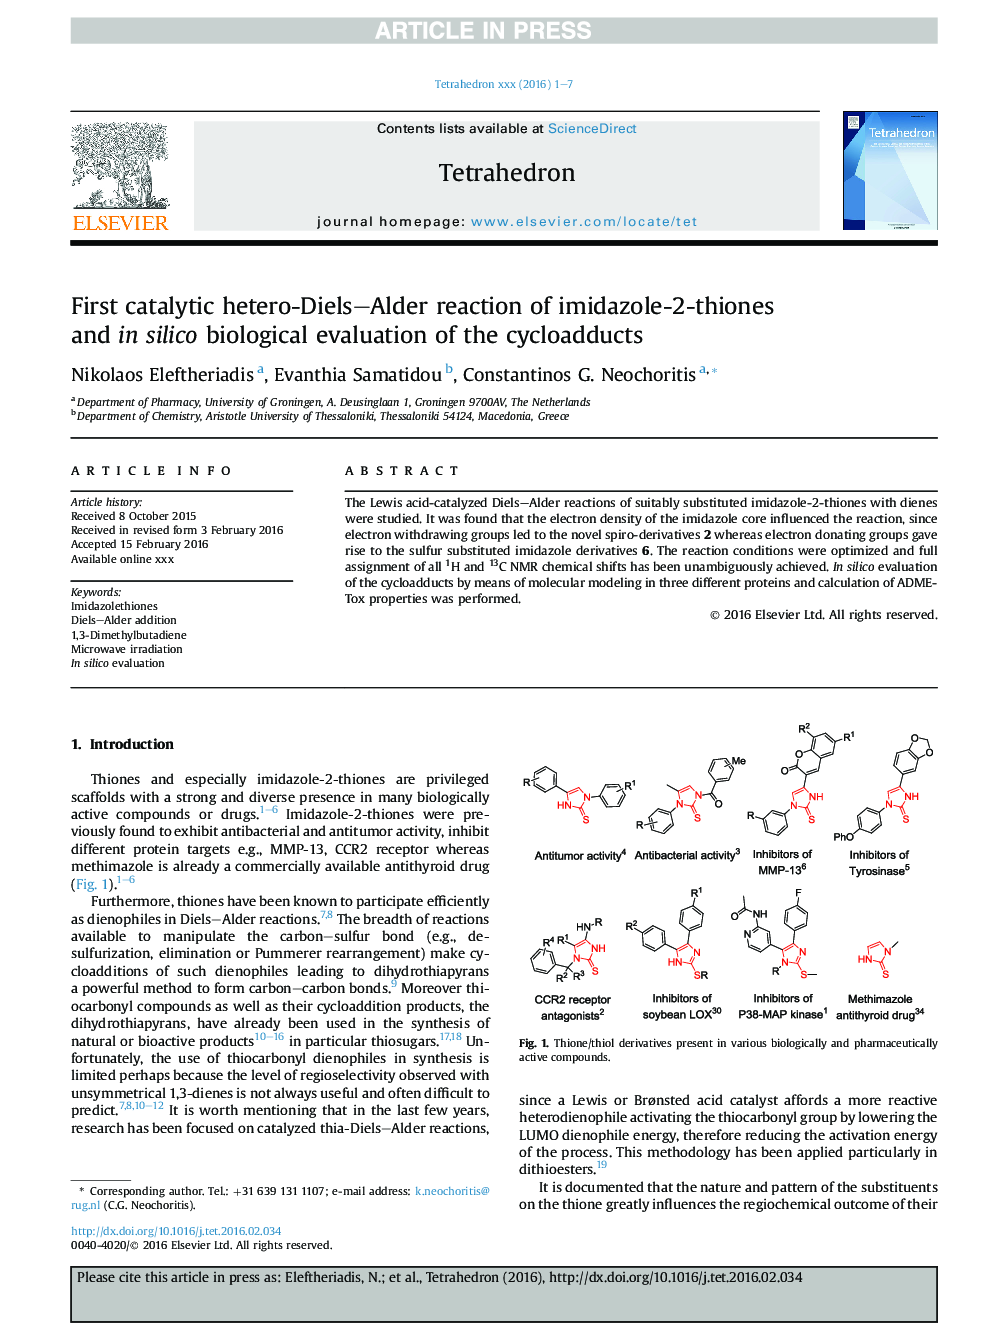 First catalytic hetero-Diels-Alder reaction of imidazole-2-thiones and in silico biological evaluation of the cycloadducts